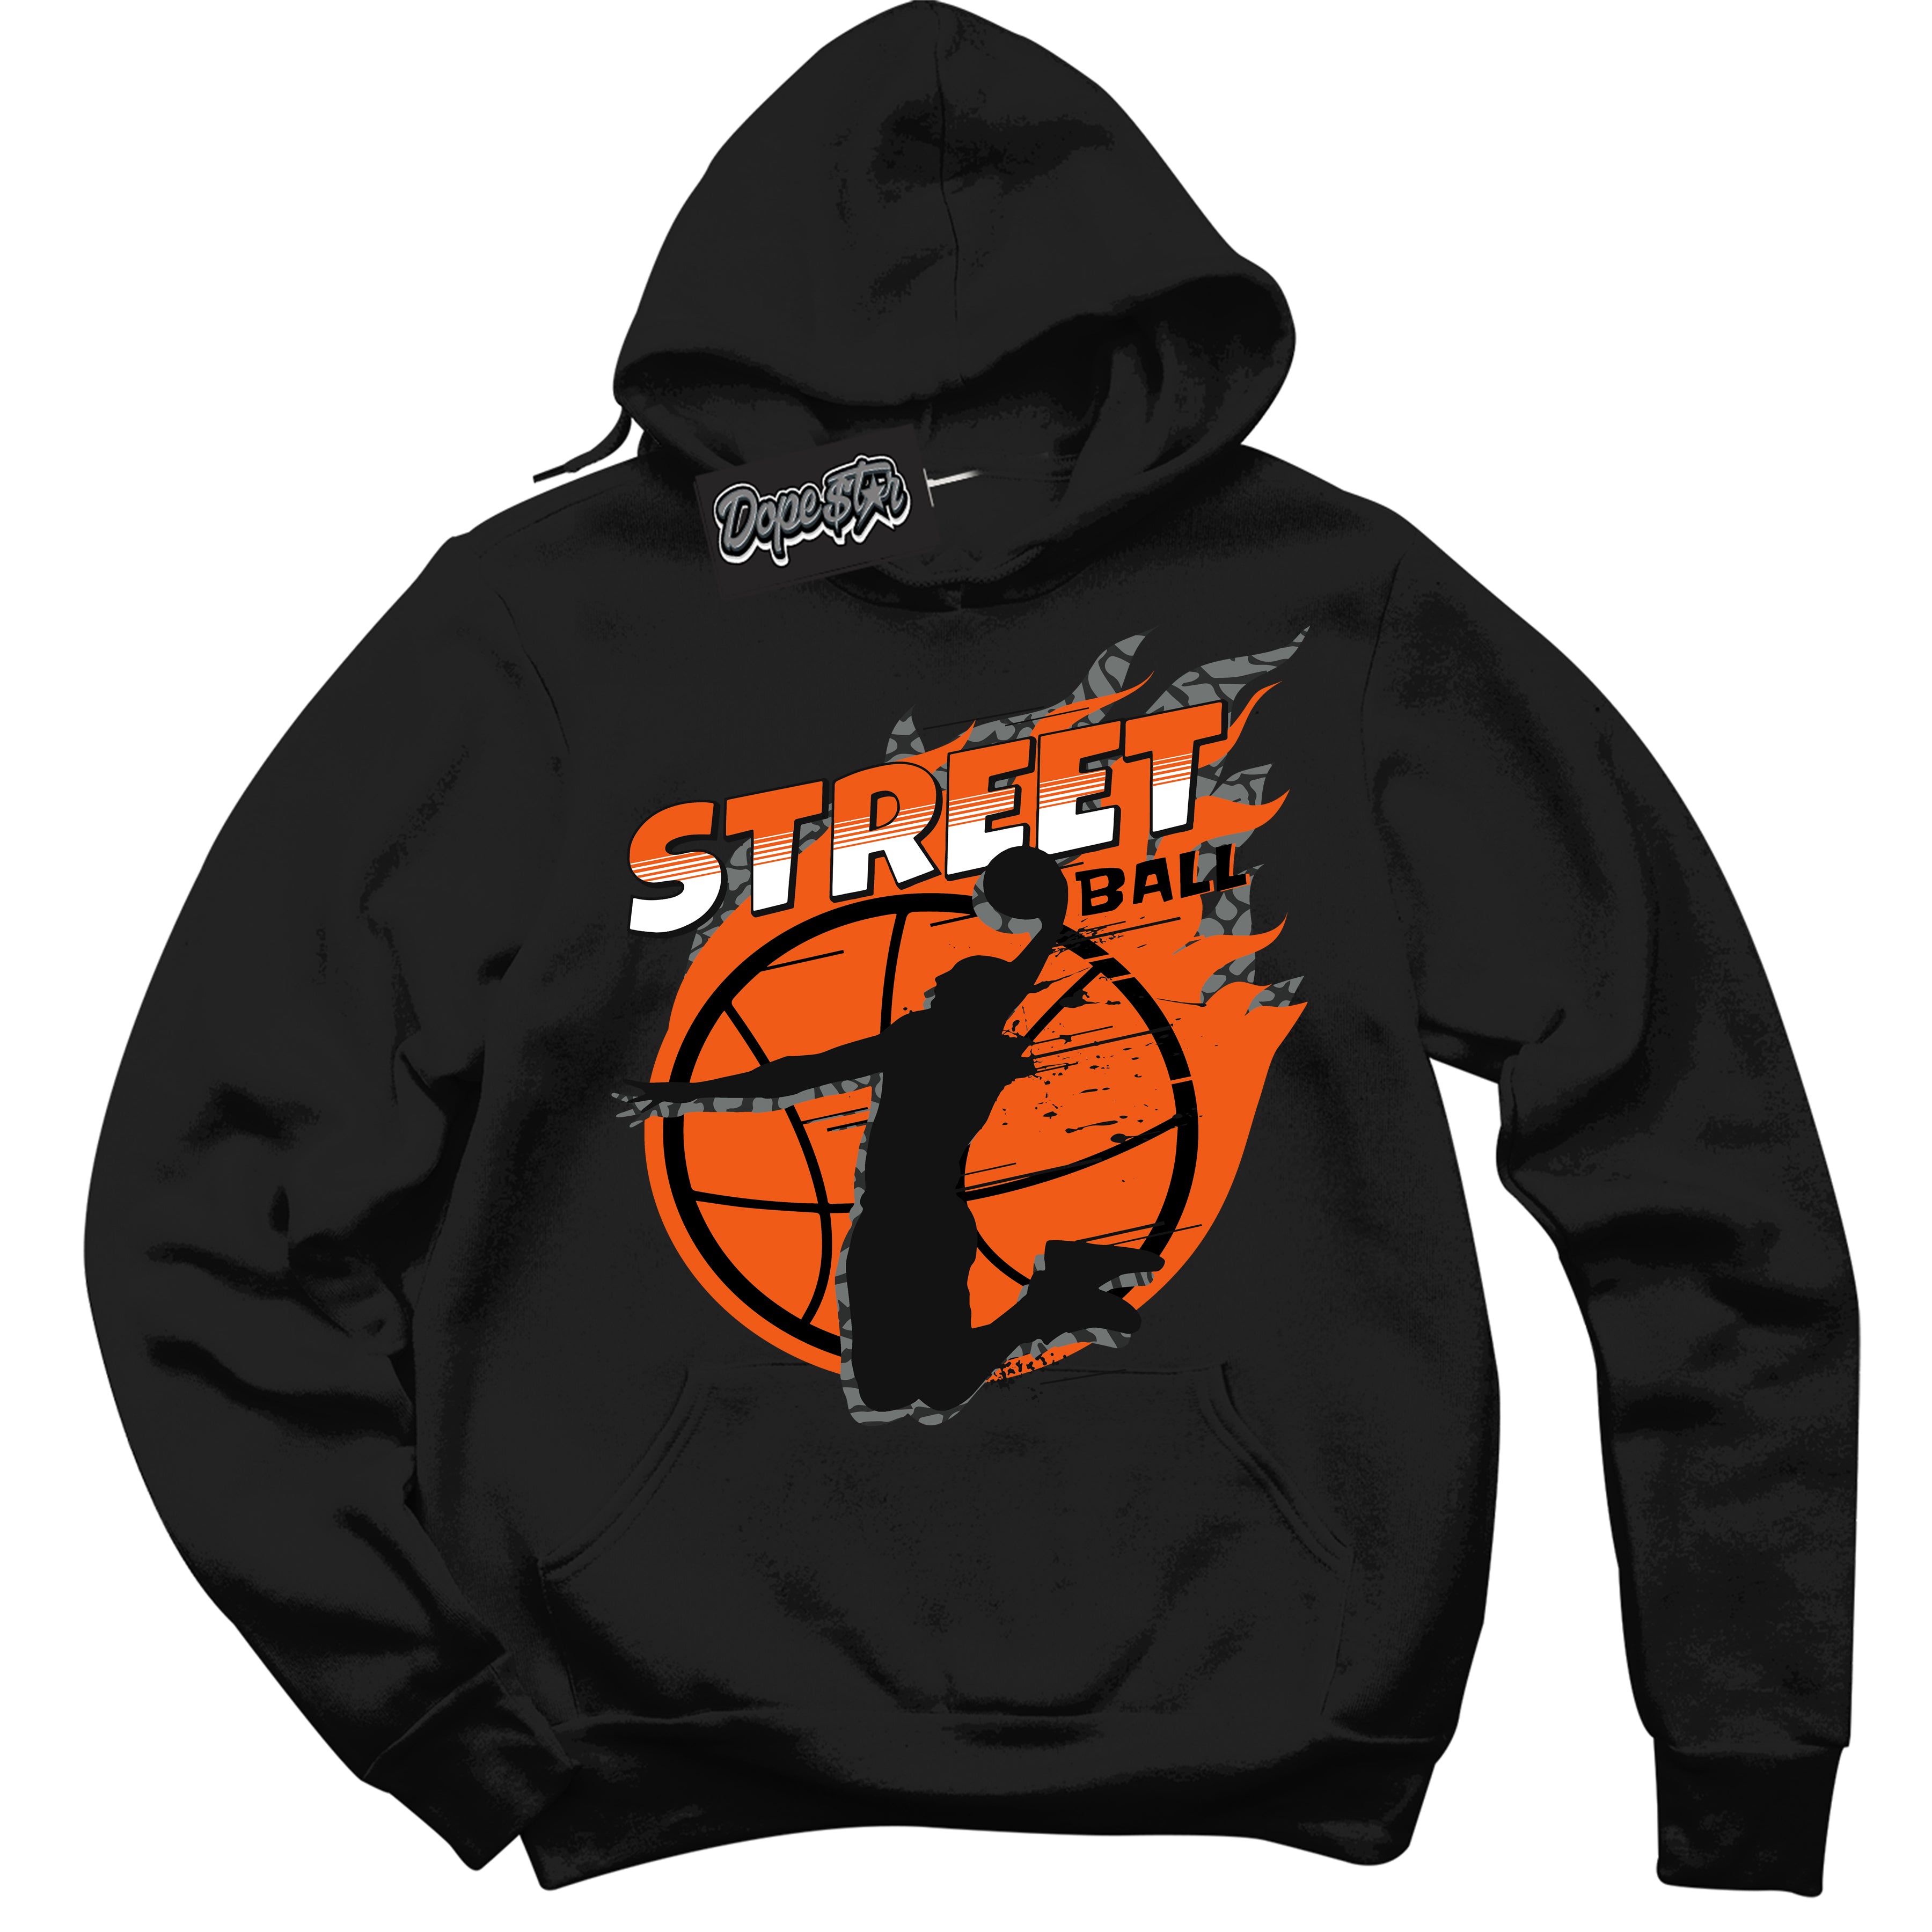 Cool Black Graphic DopeStar Hoodie with “ Street Ball “ print, that perfectly matches Fear Pack 3s sneakers